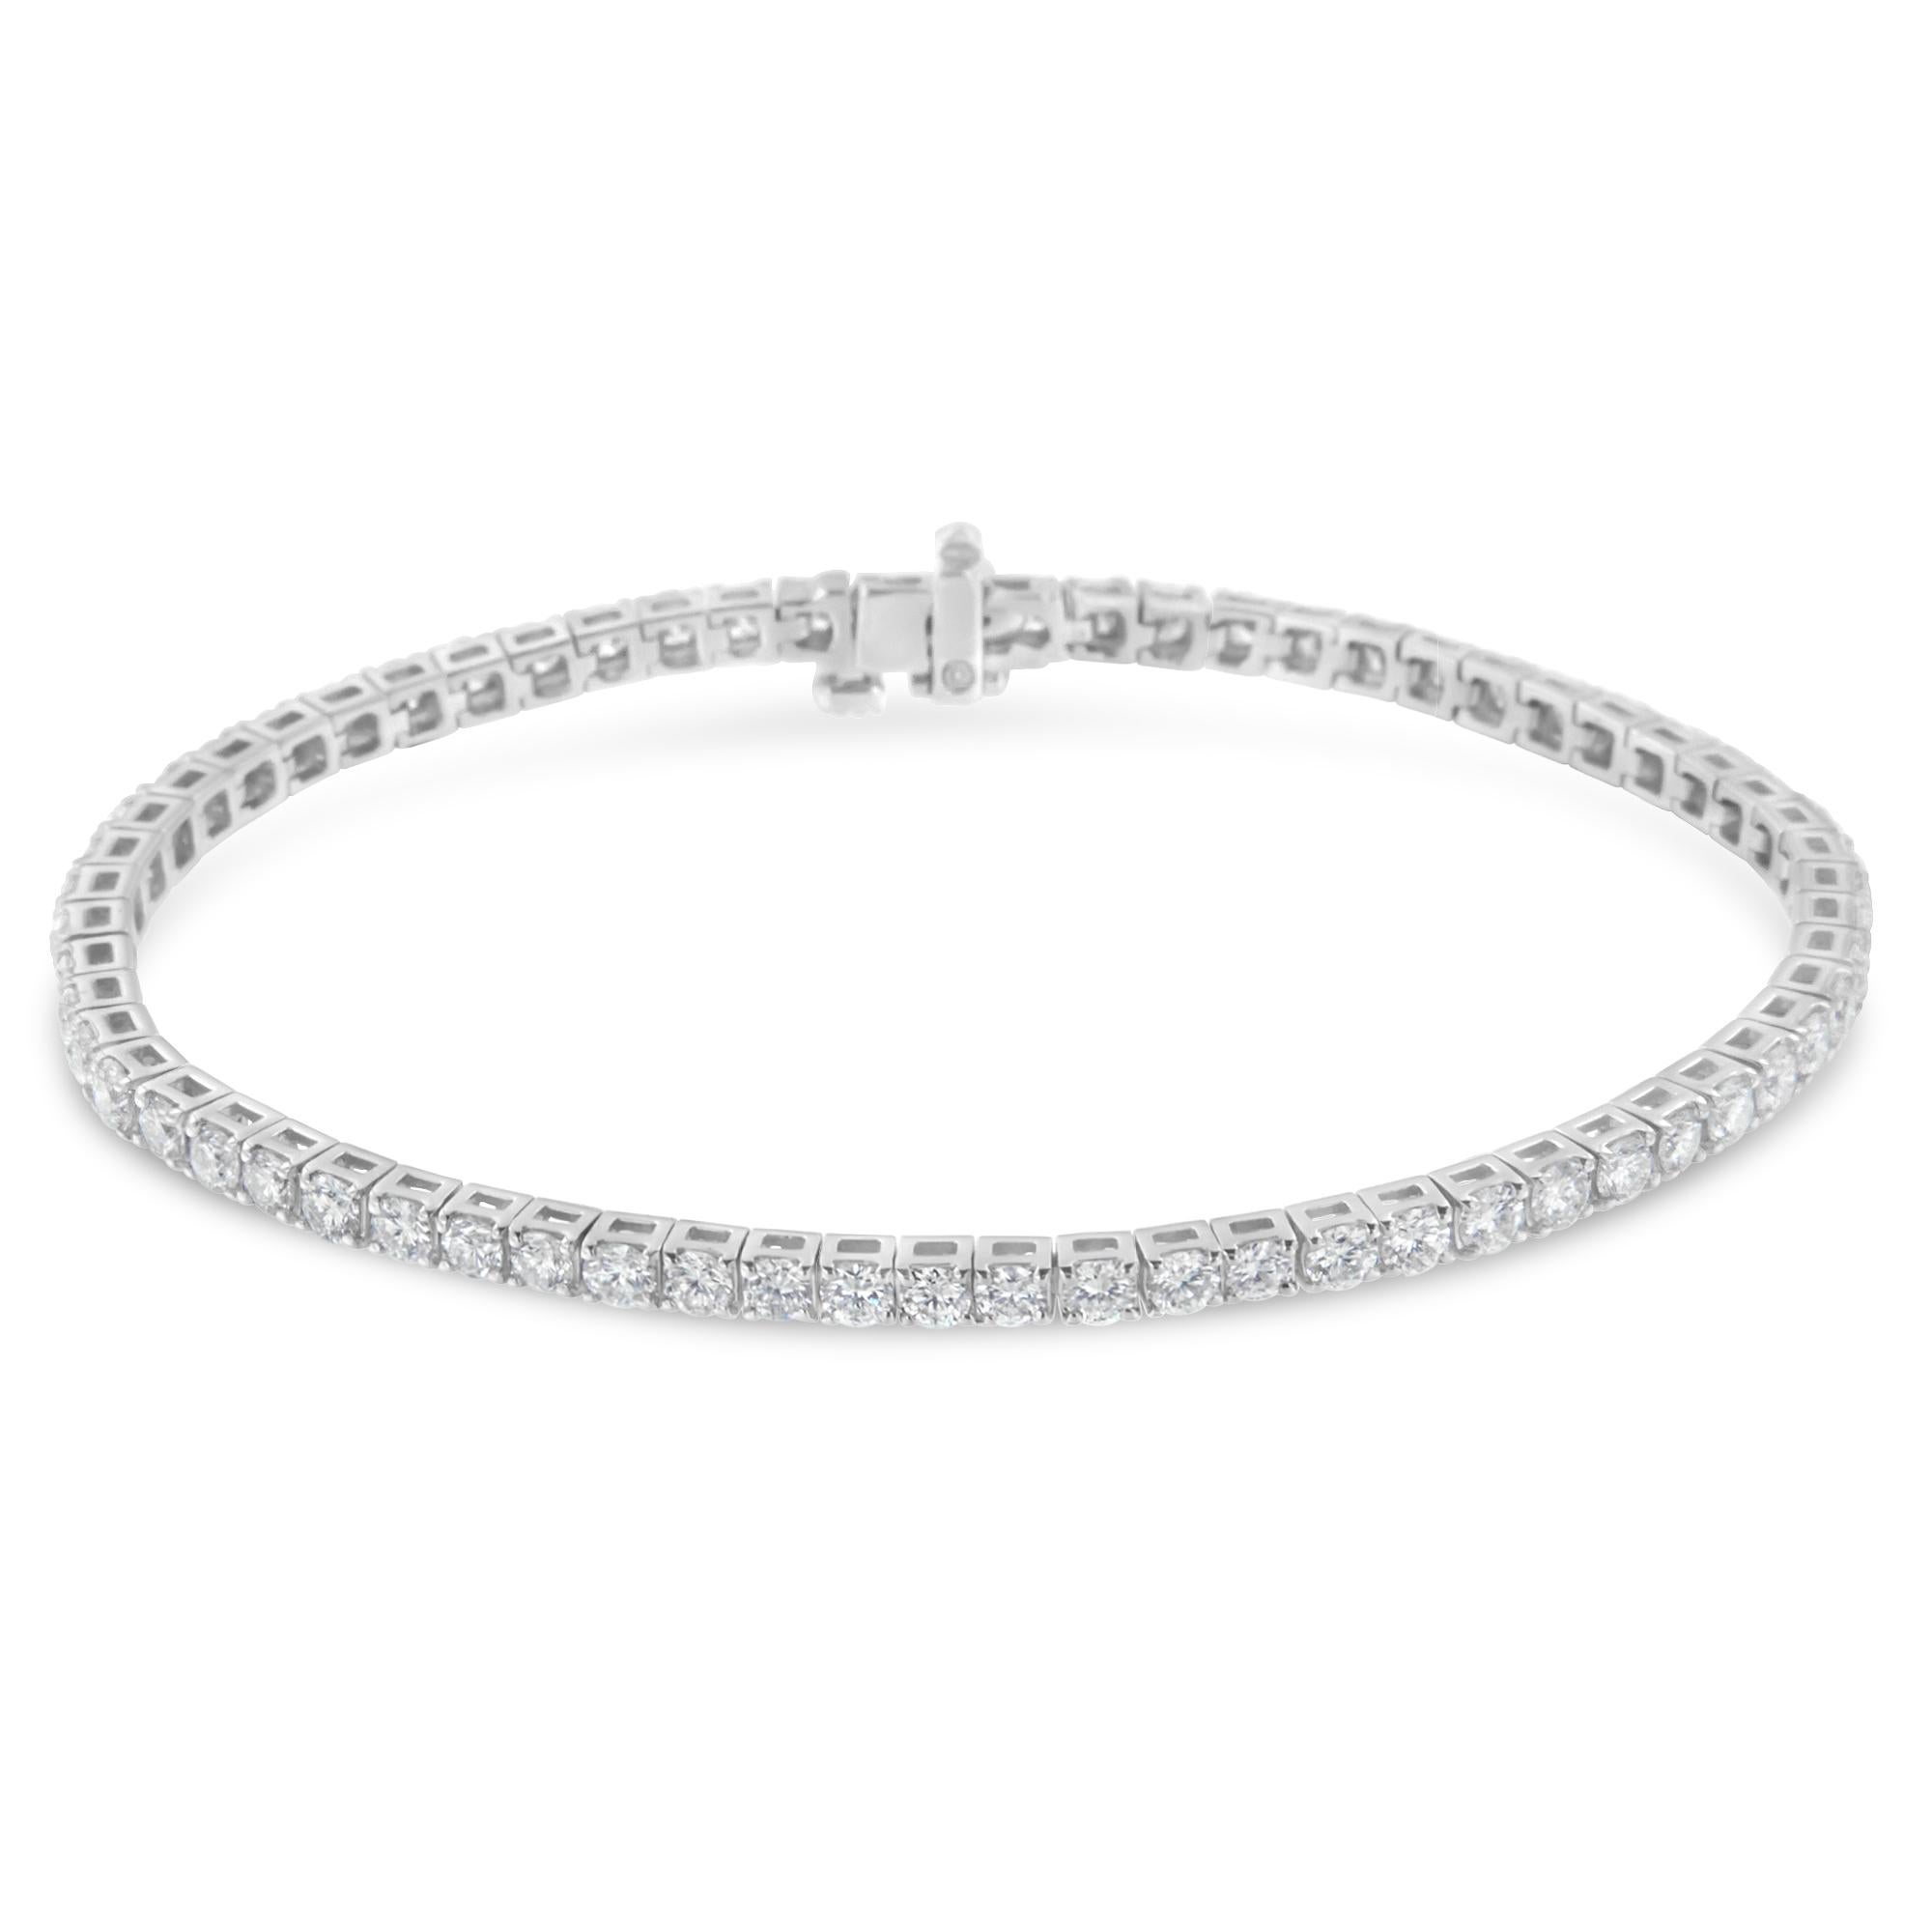 Elevate her wardrobe with this luxurious, exquisite 14K white gold diamond tennis bracelet, showcasing a stunning collection of natural diamonds. An ideal accessory for any occasion, this captivating design features 58 brilliant, natural round-cut